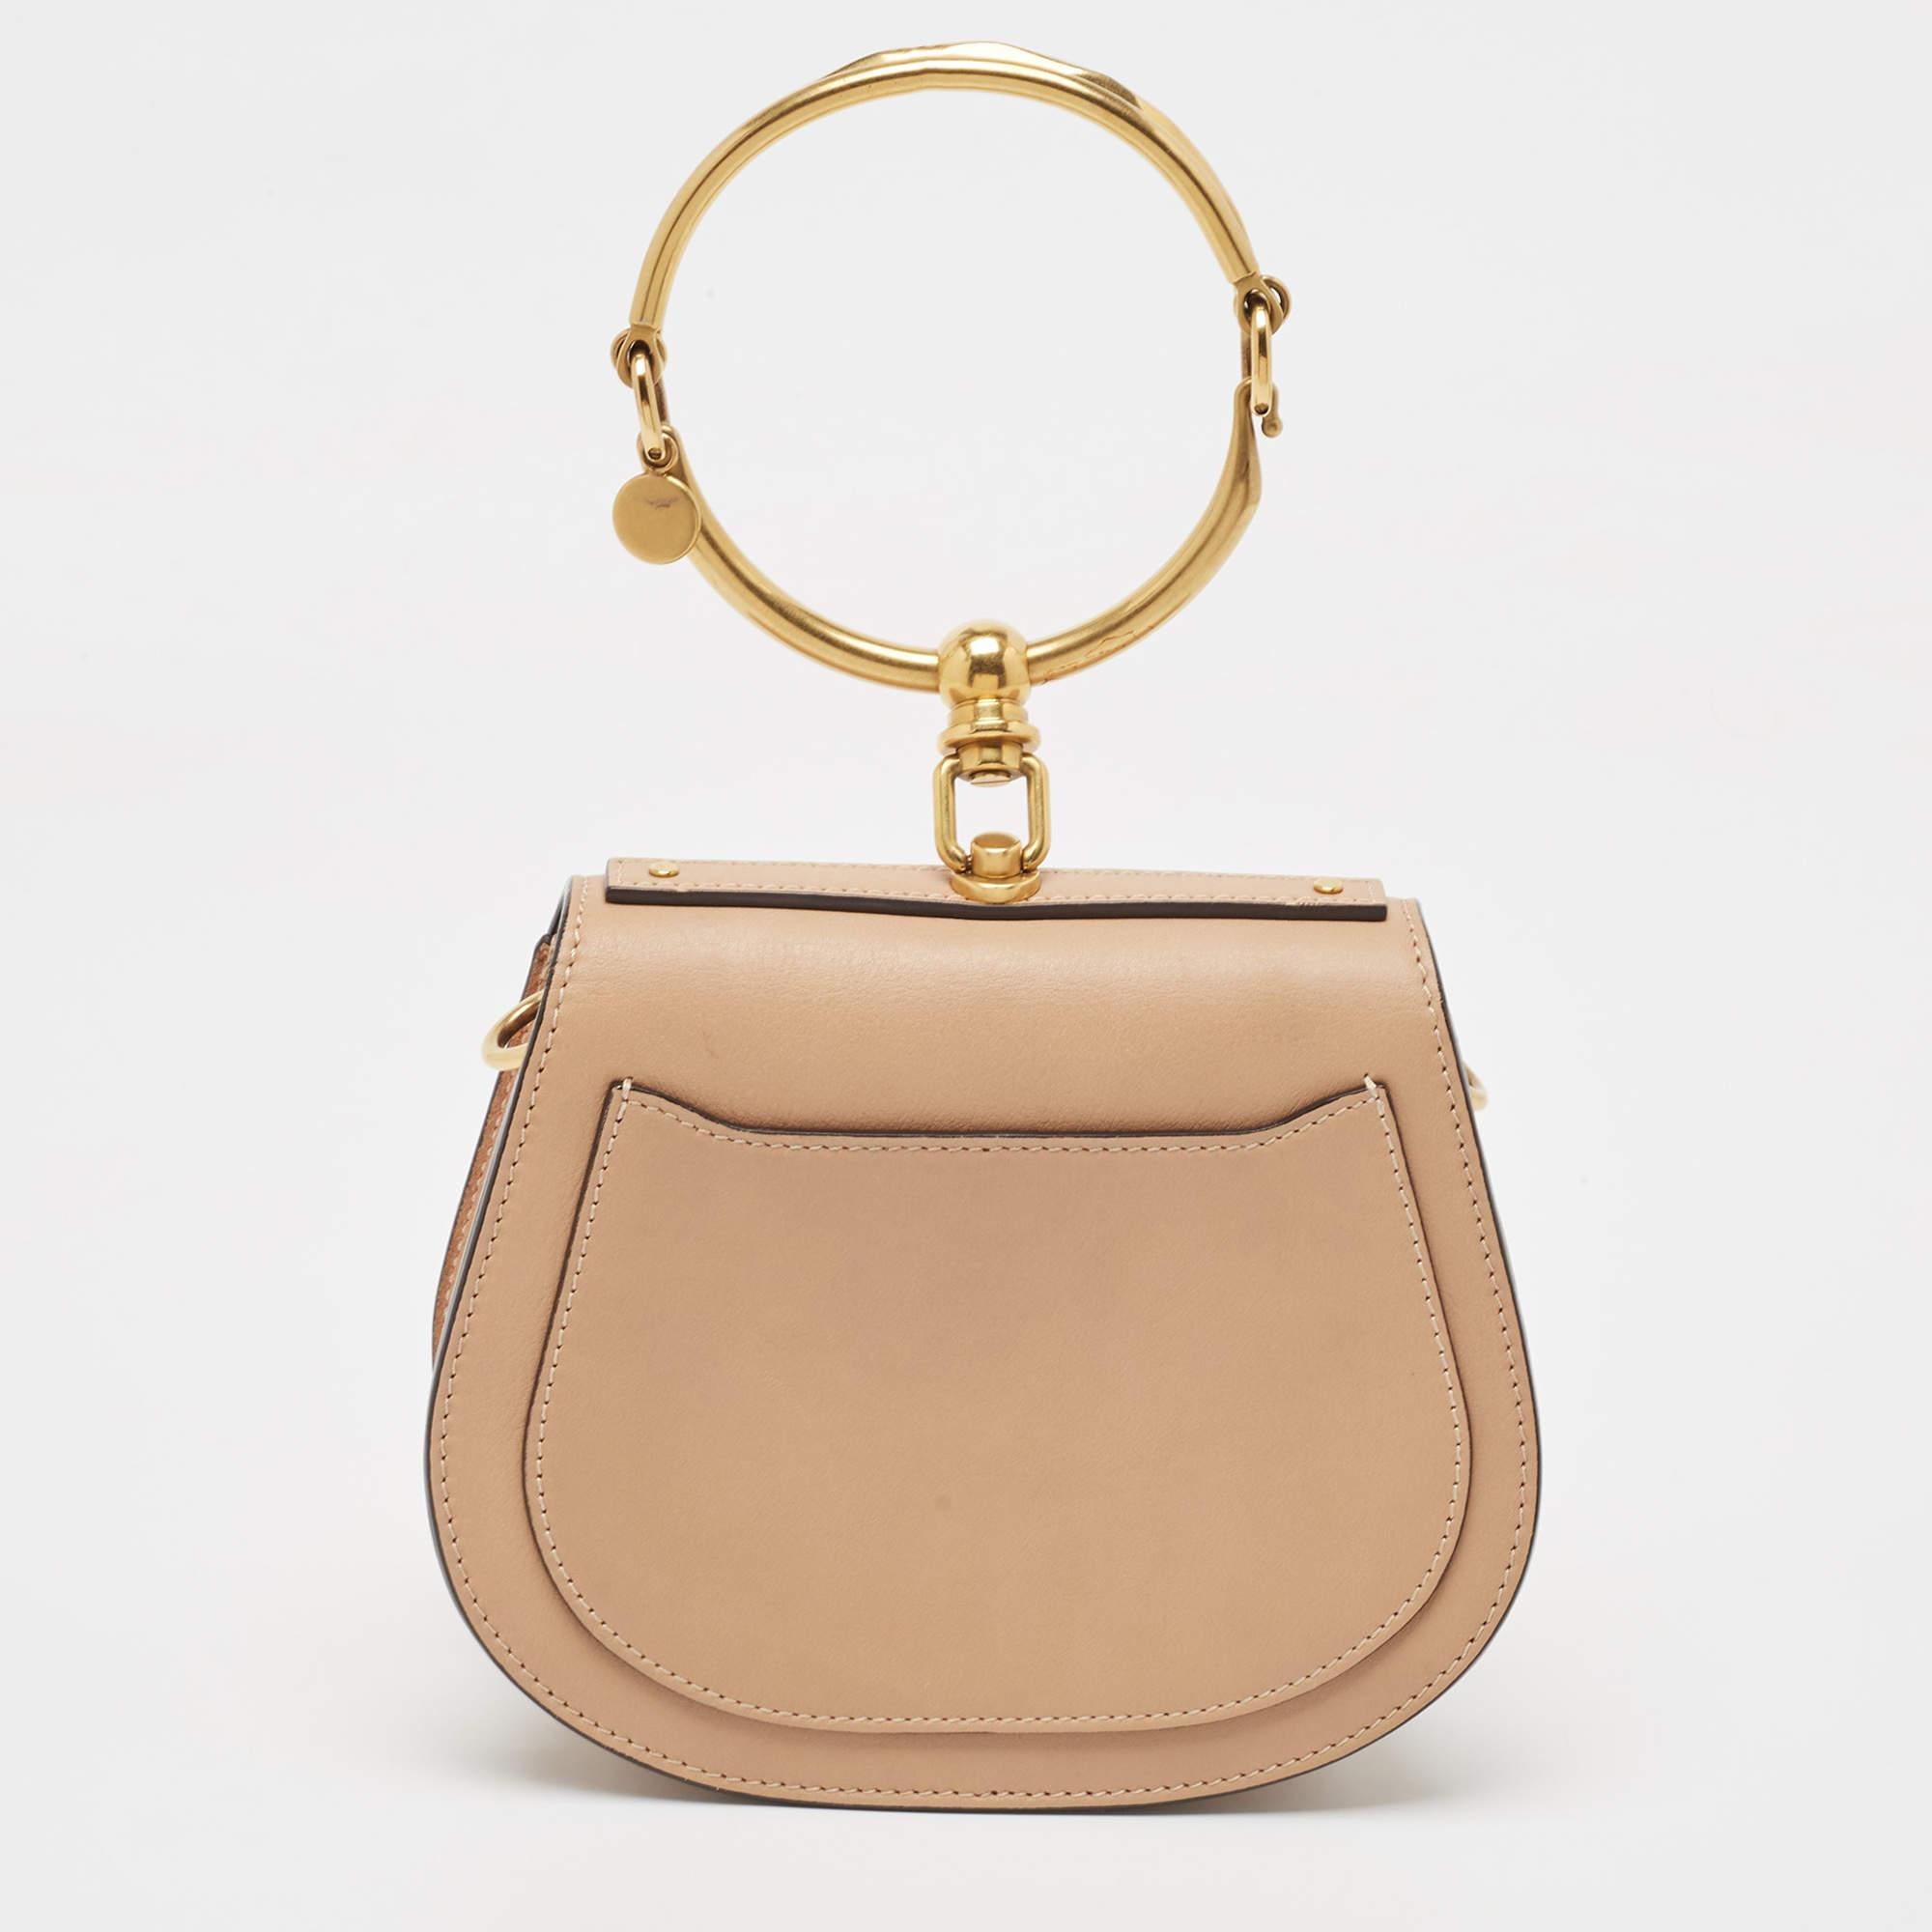 Chloe Beige Leather and Suede Small Nile Bracelet Crossbody Bag 6